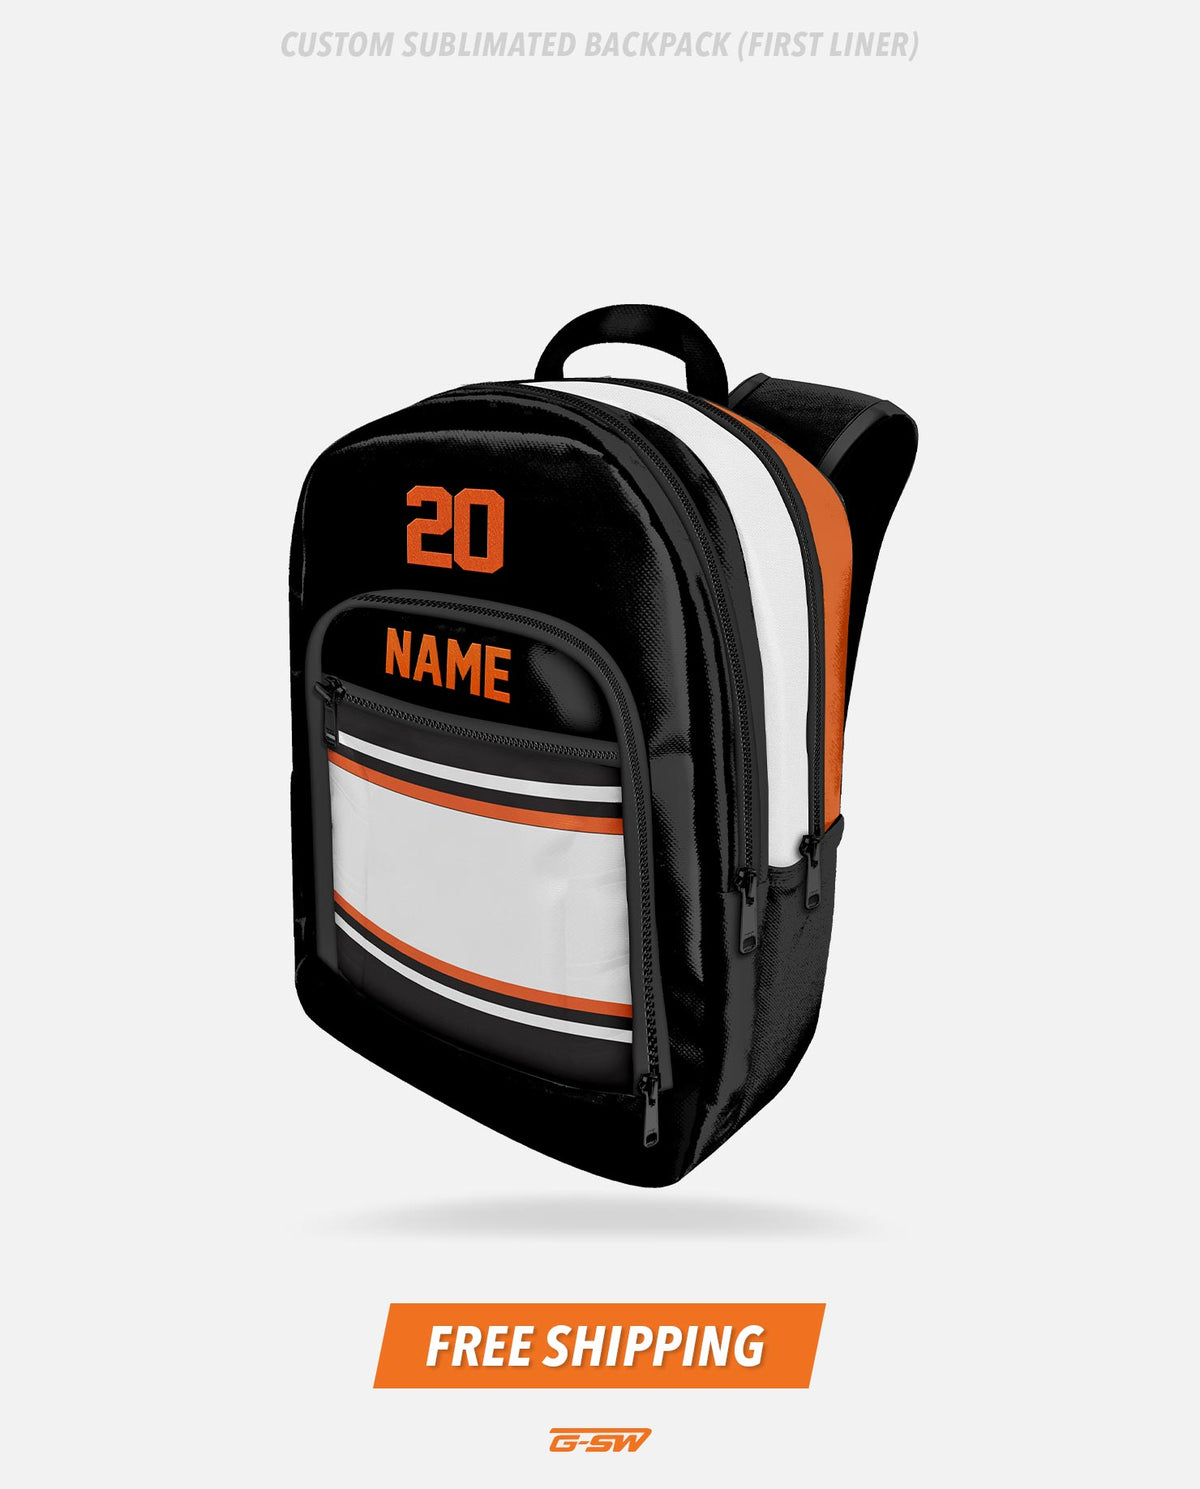 GSW Custom Sublimated Backpack (First Liner)